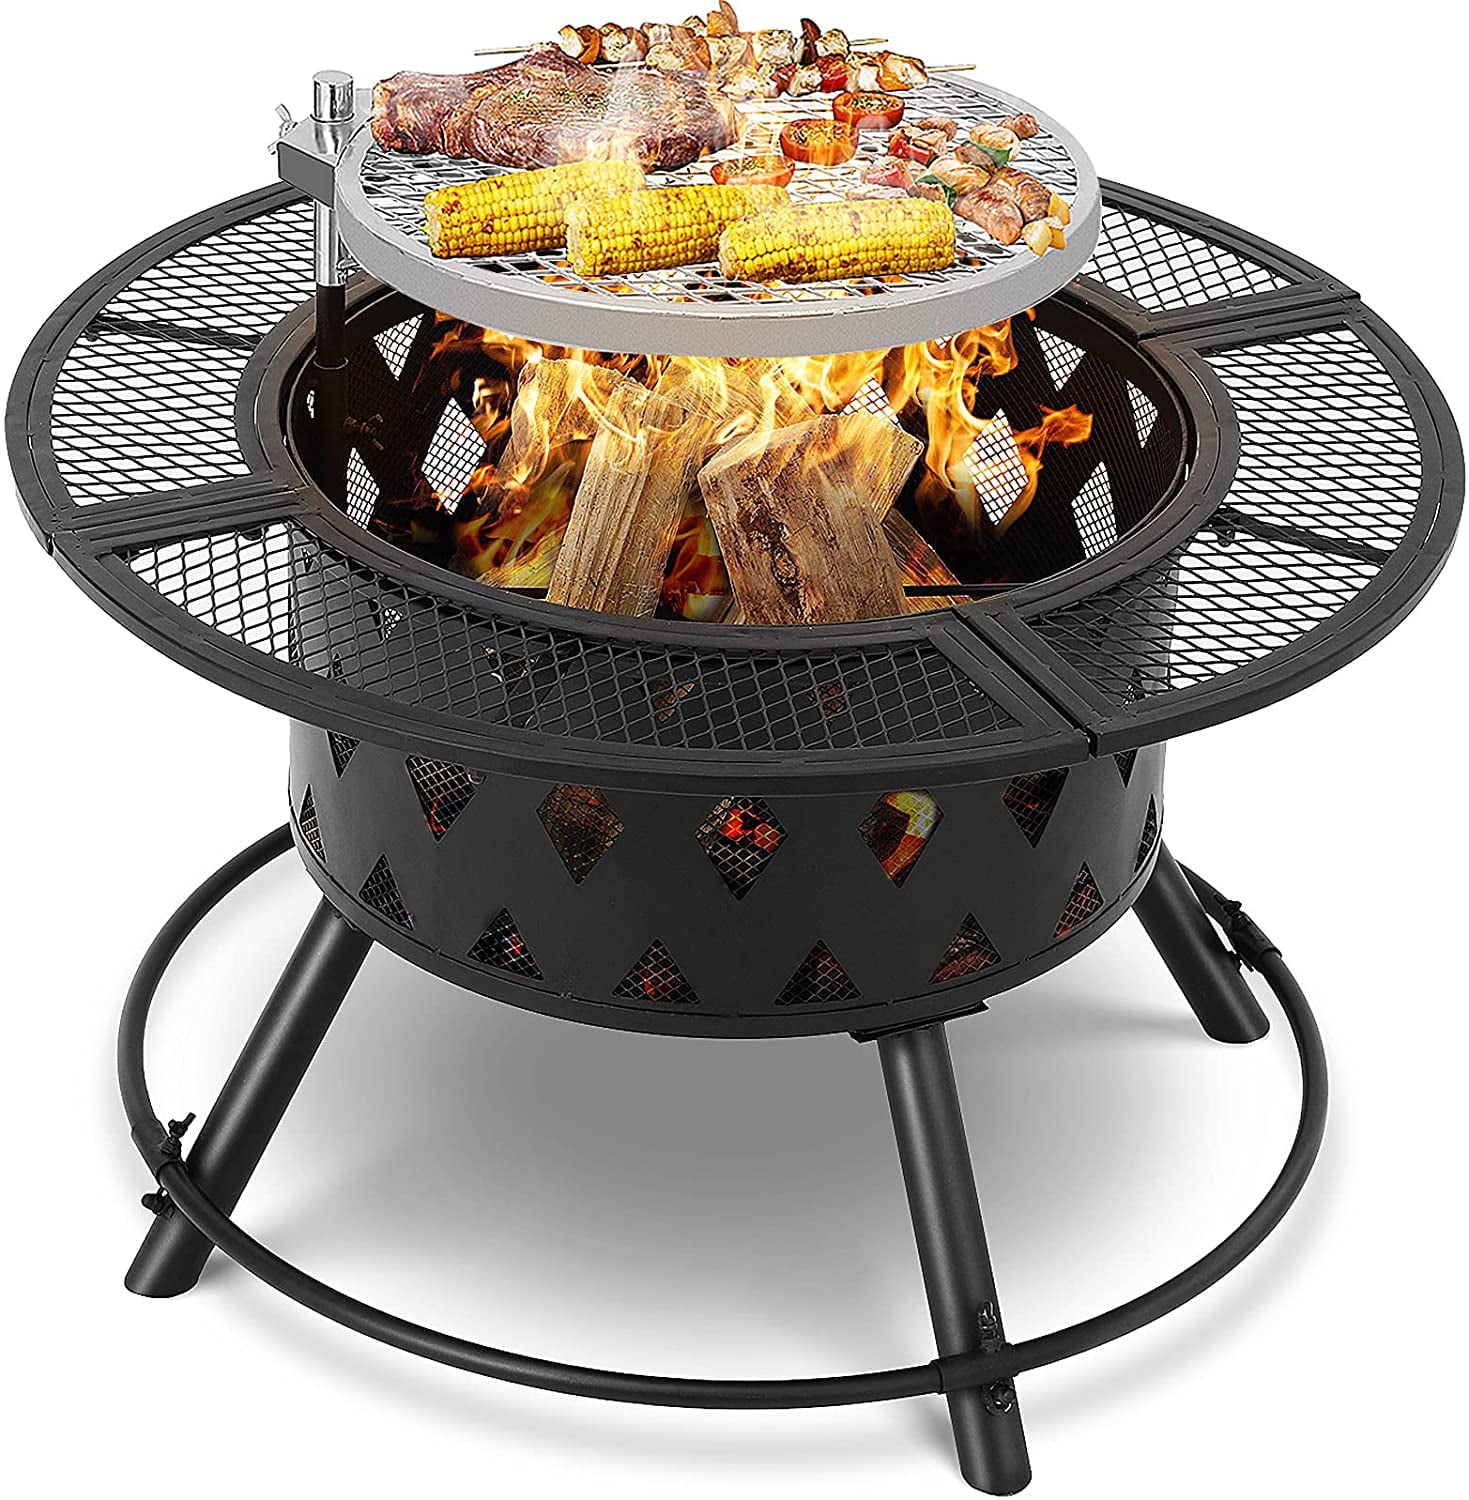 Gartio 36 Wood Burning Fire Pit Bowl, Ranch Fire Pit